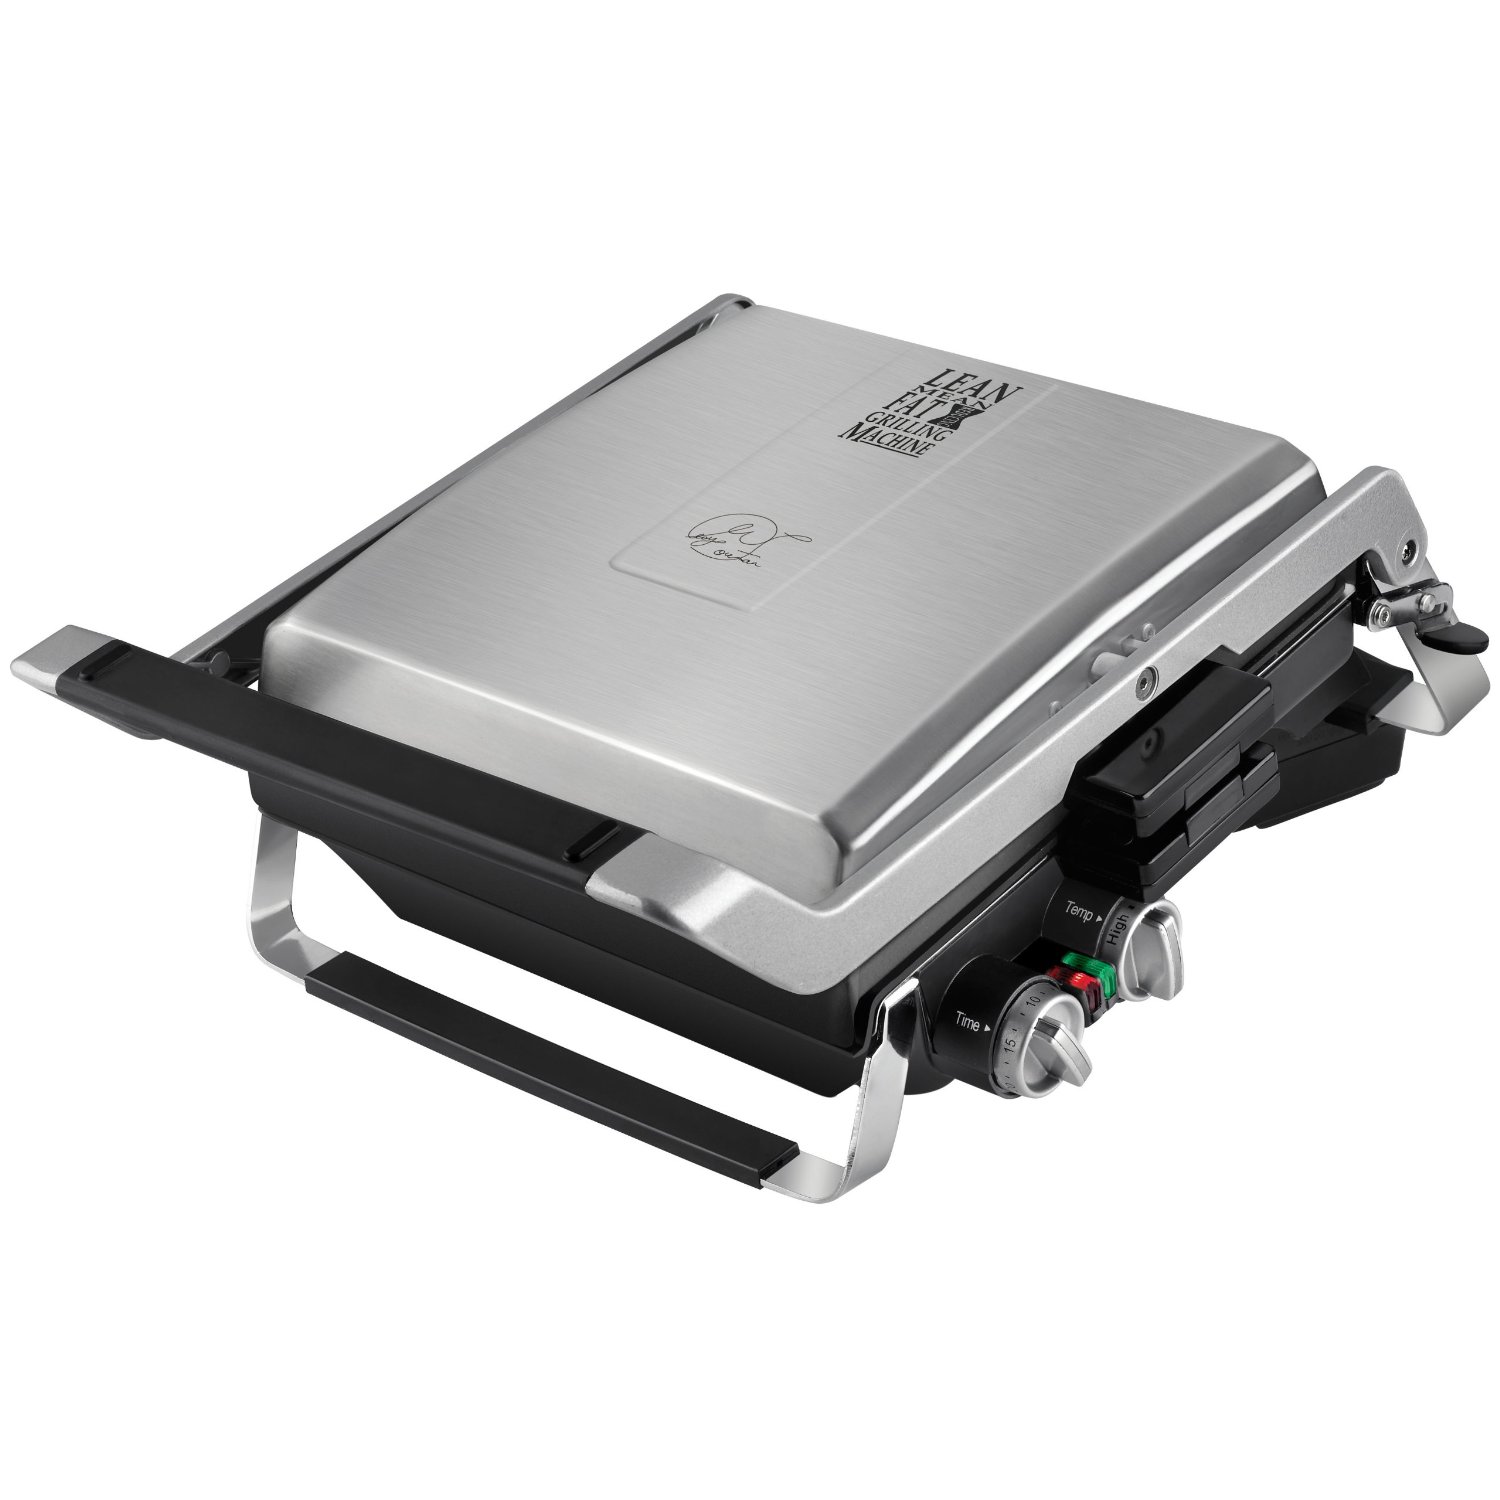 George Foreman GRP100 The Next Grilleration G100 Stainless-Steel Nonstick Countertop Grill $73.99